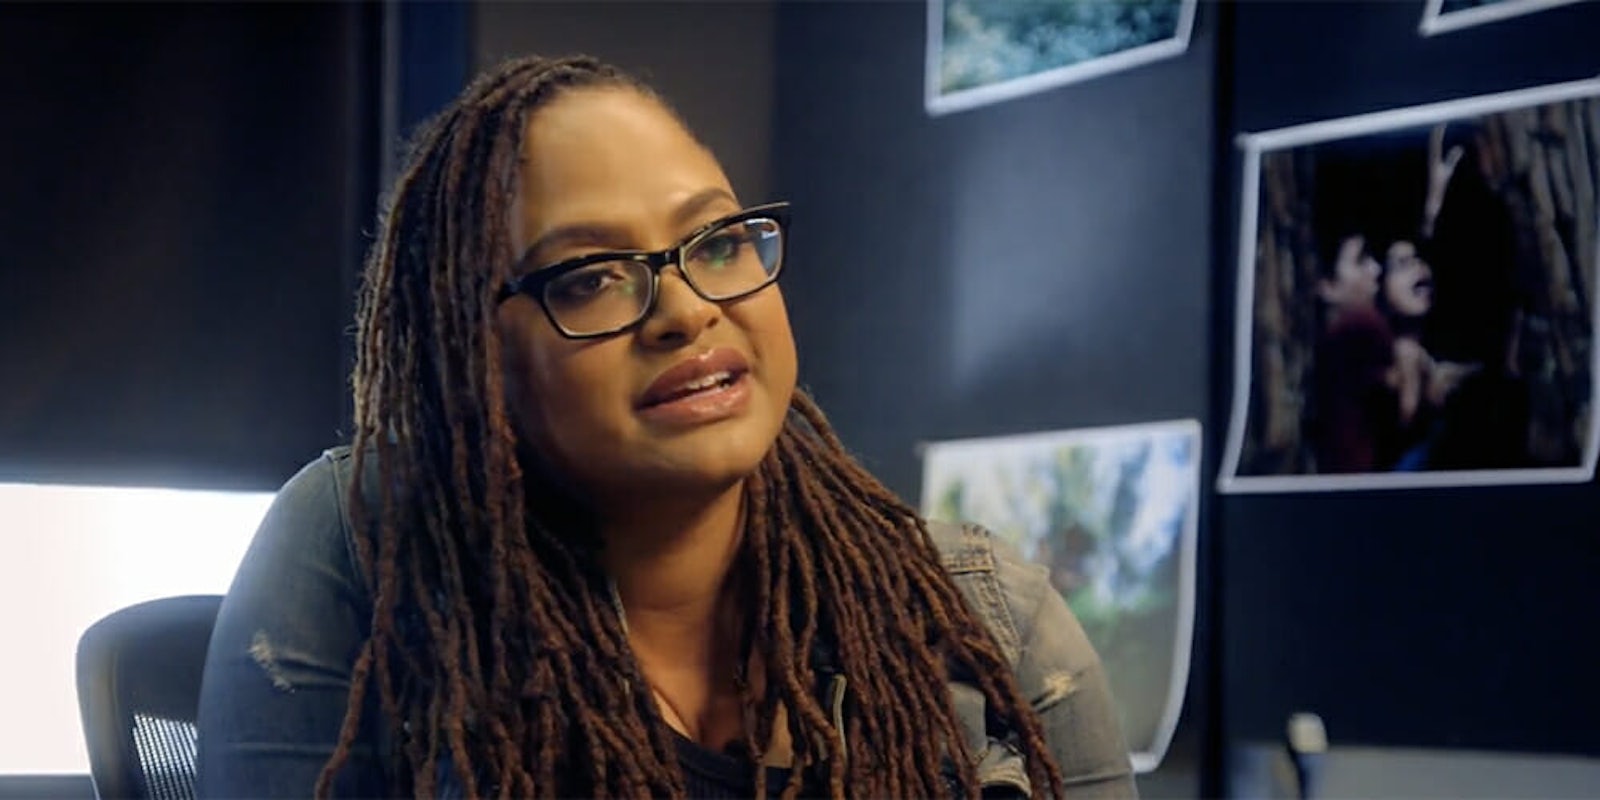 Ava DuVernay inadvertently launched a debate about the merits of calling someone an 'Auntie.'